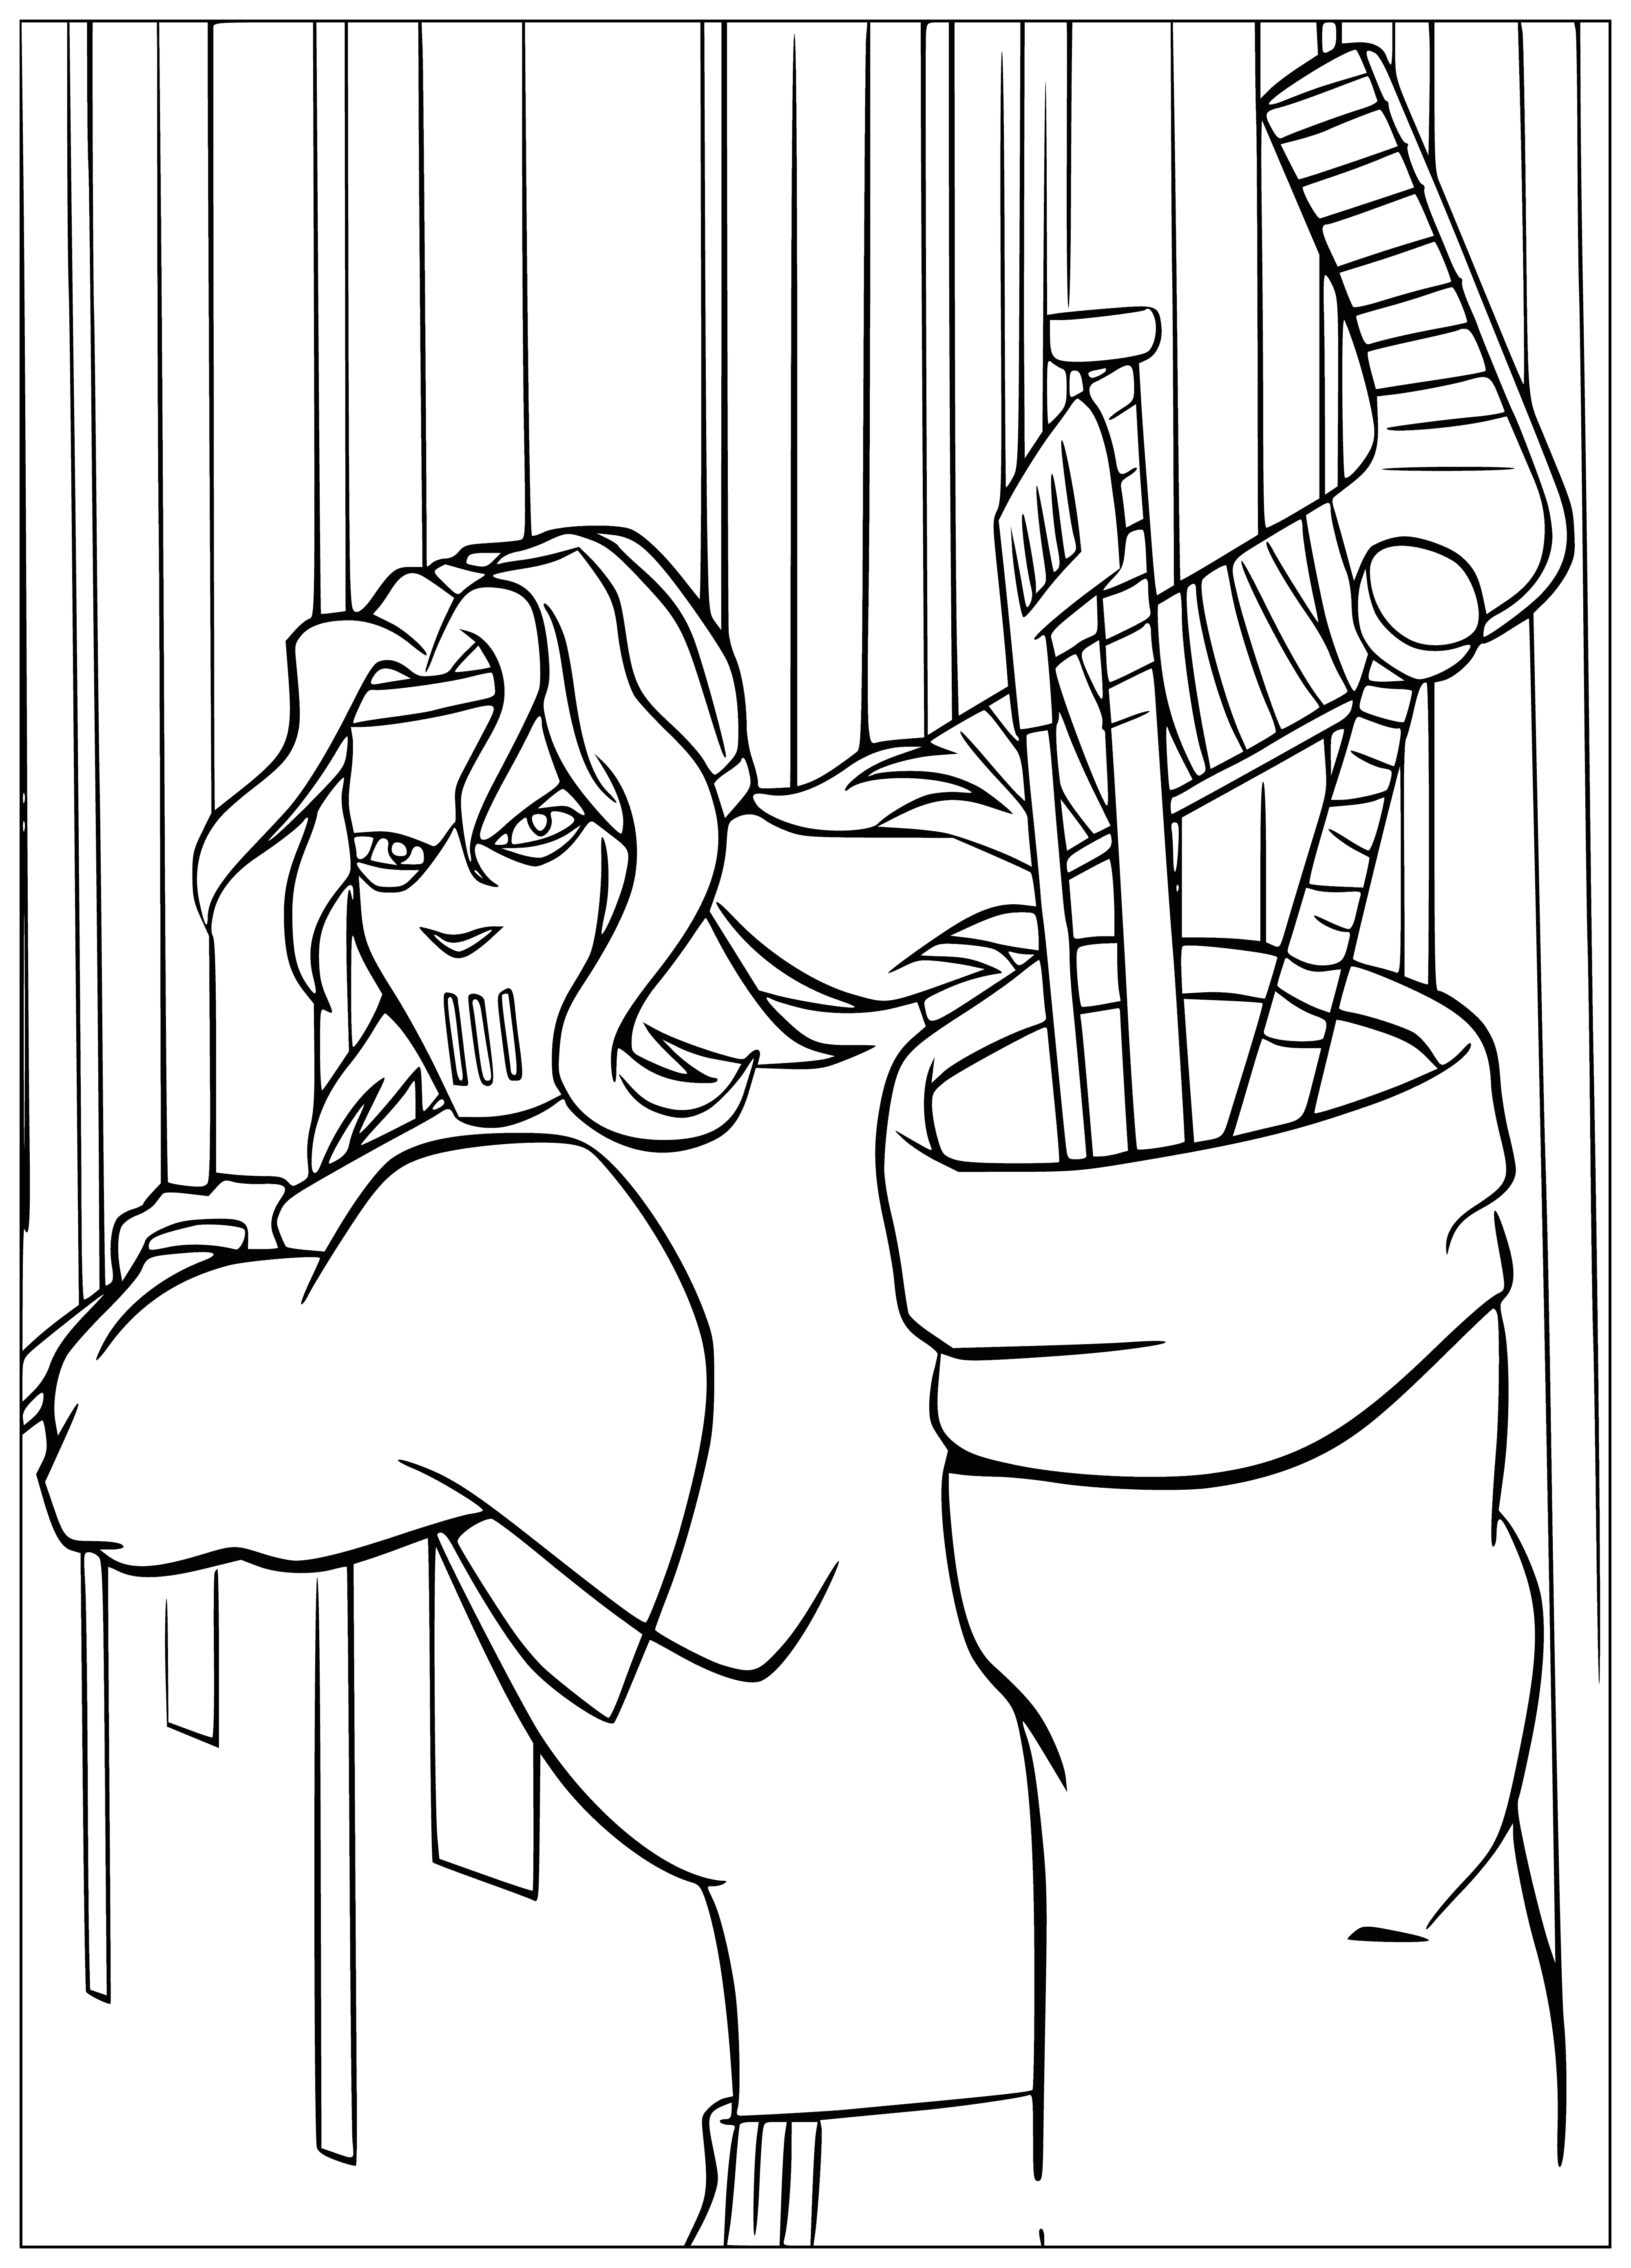 coloring page: Teenage Mutant Ninja Turtles are unstoppable crime fighters with martial arts skills, agility, and weapons. They keep their identities secret with masks. #TMNT